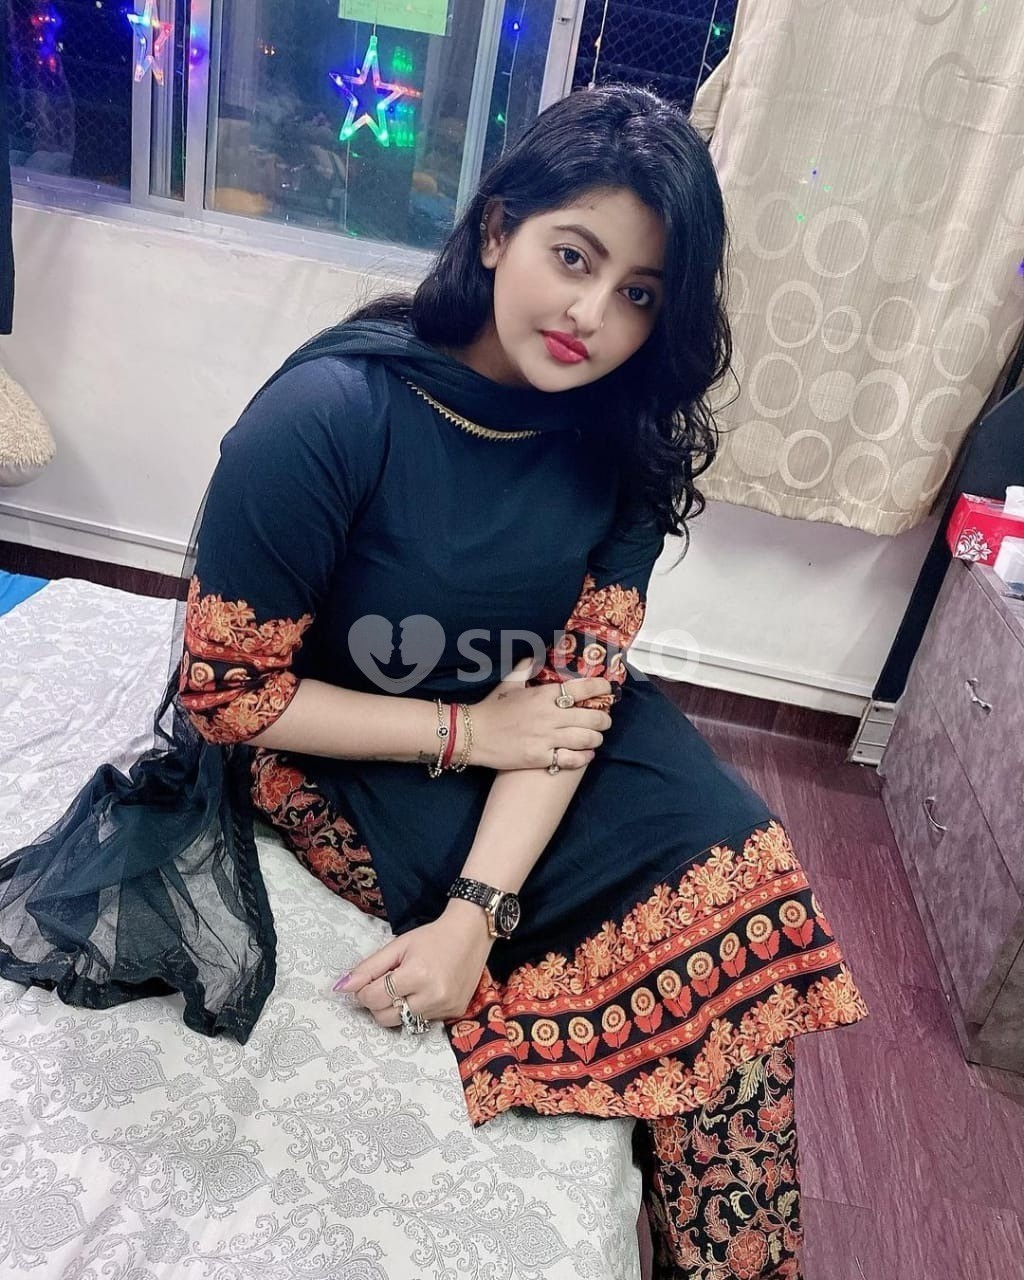 Karimnagar VIP Monika Low price 100% genuine 👥 sexy VIP call girls are provided👌safe and secure service .call 📞